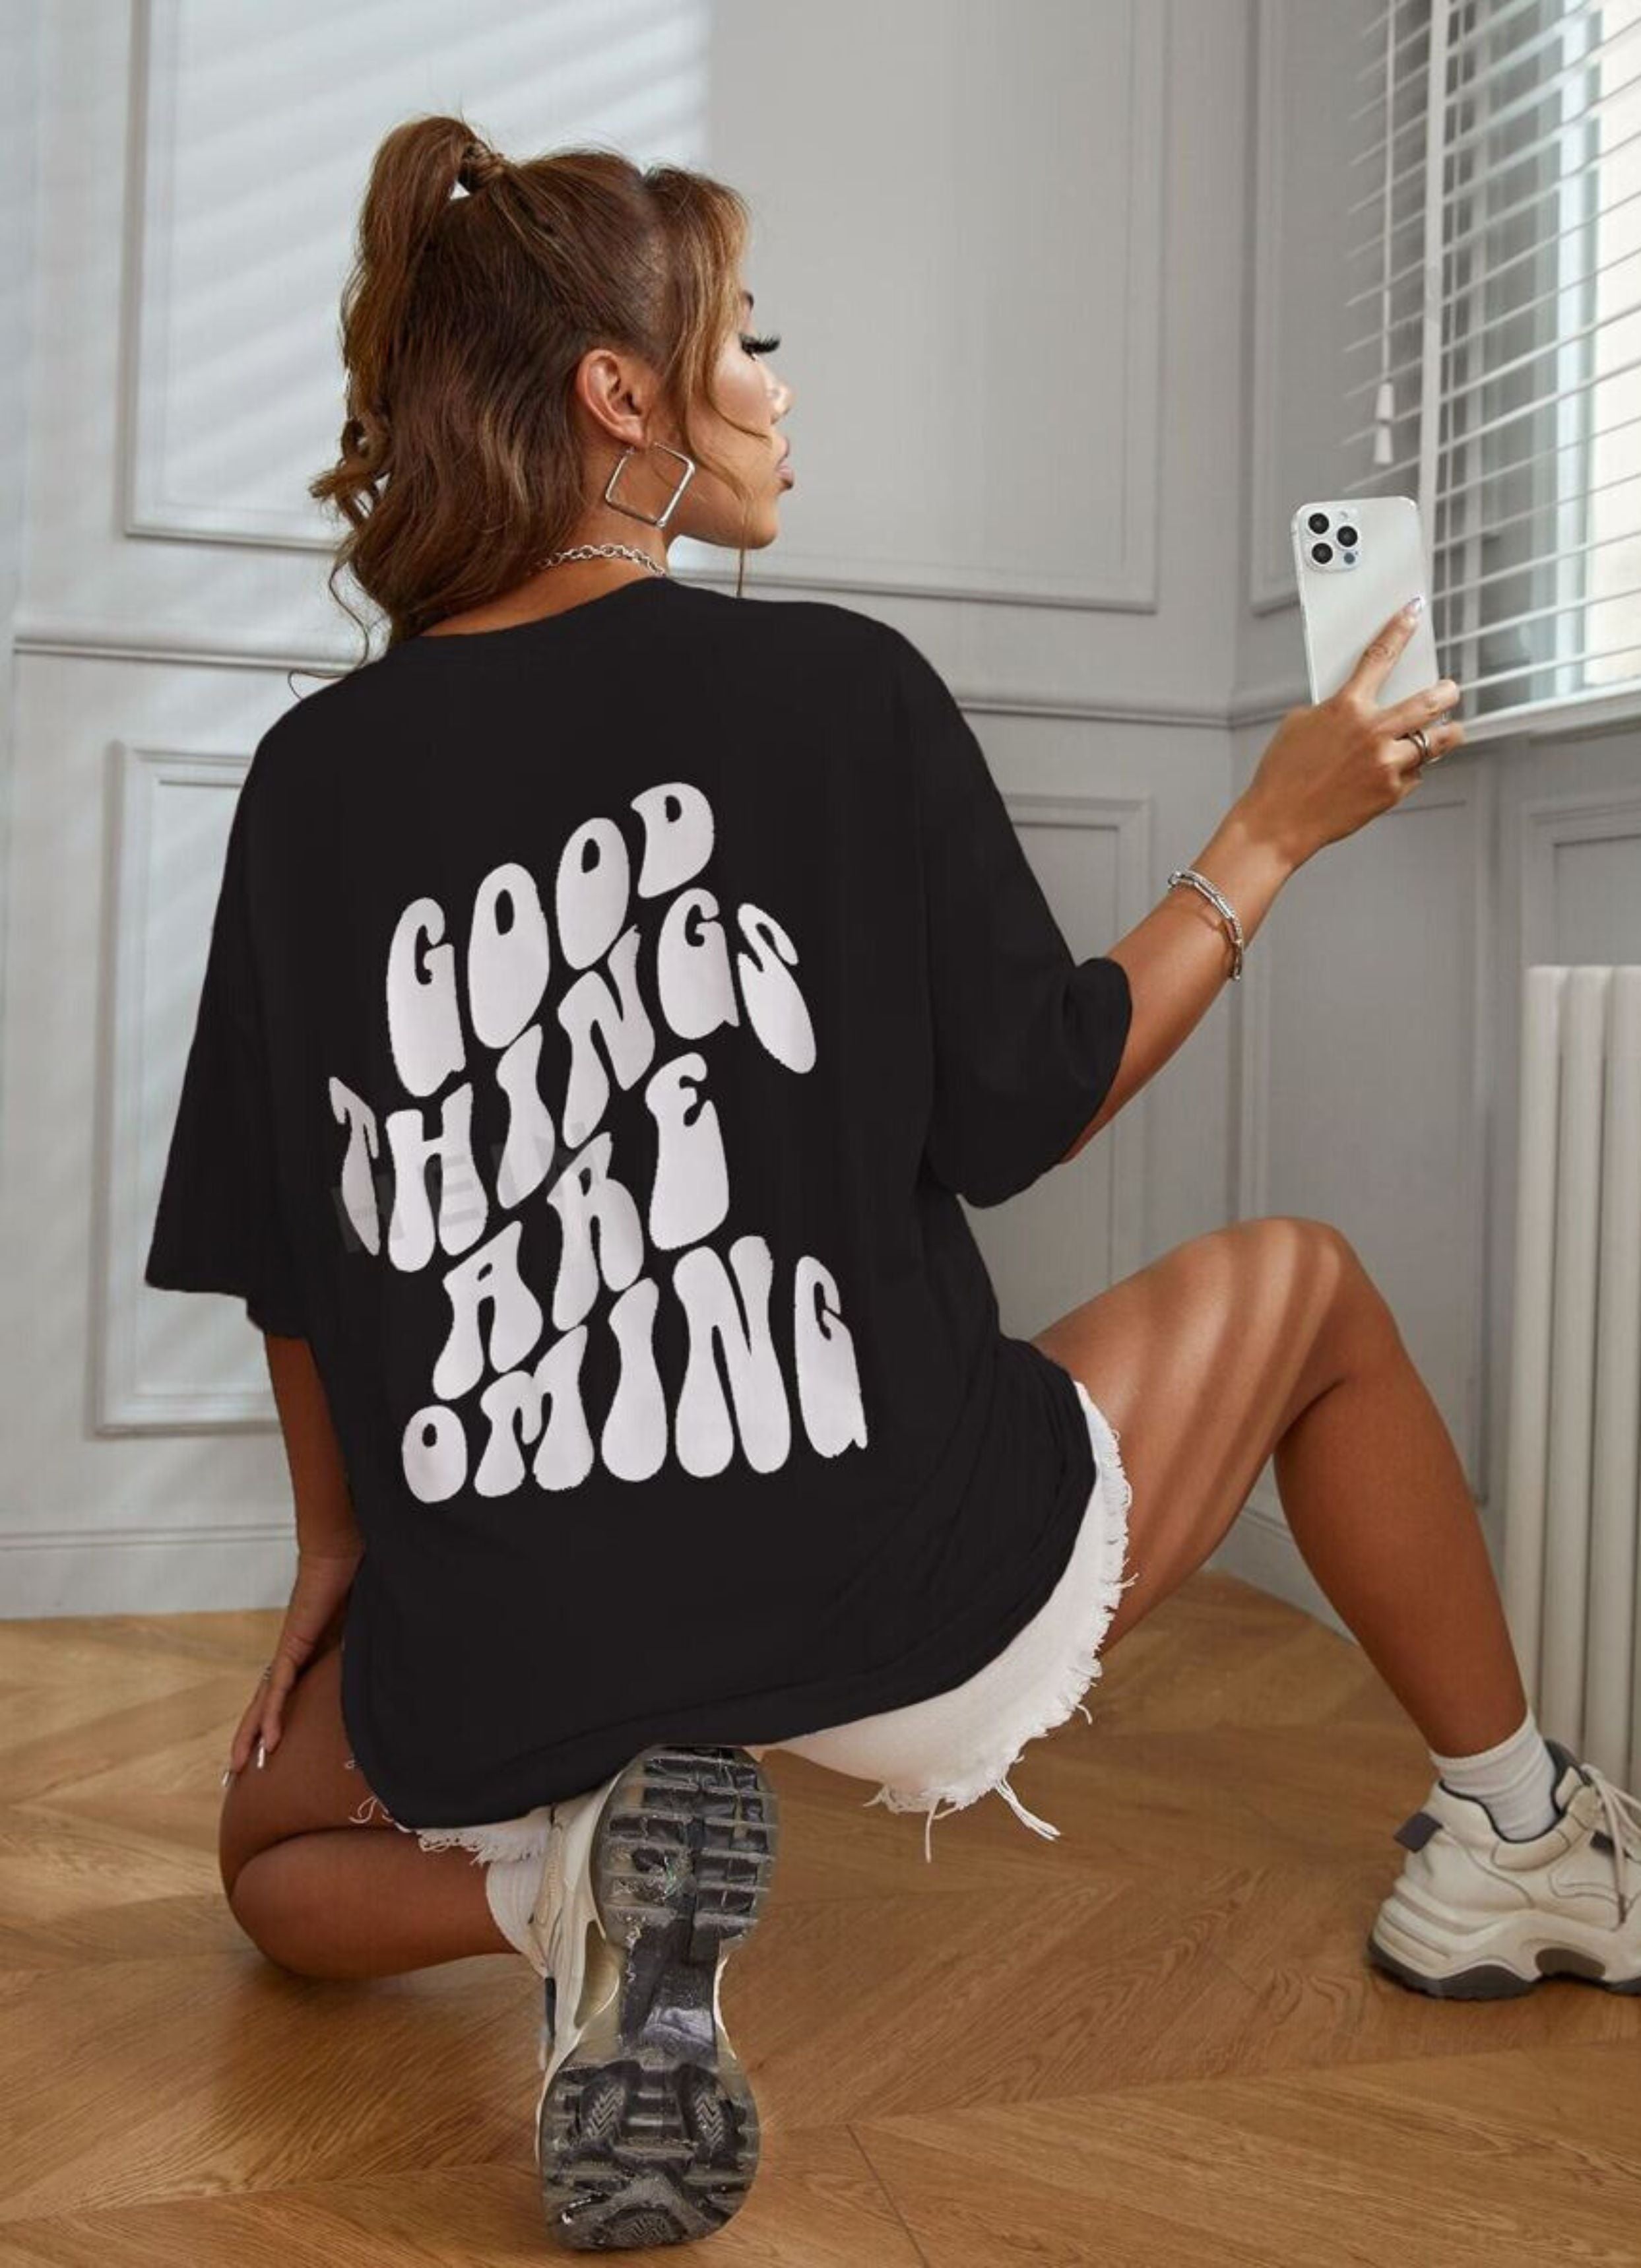 Good Things Are Coming Oversized Tshirt